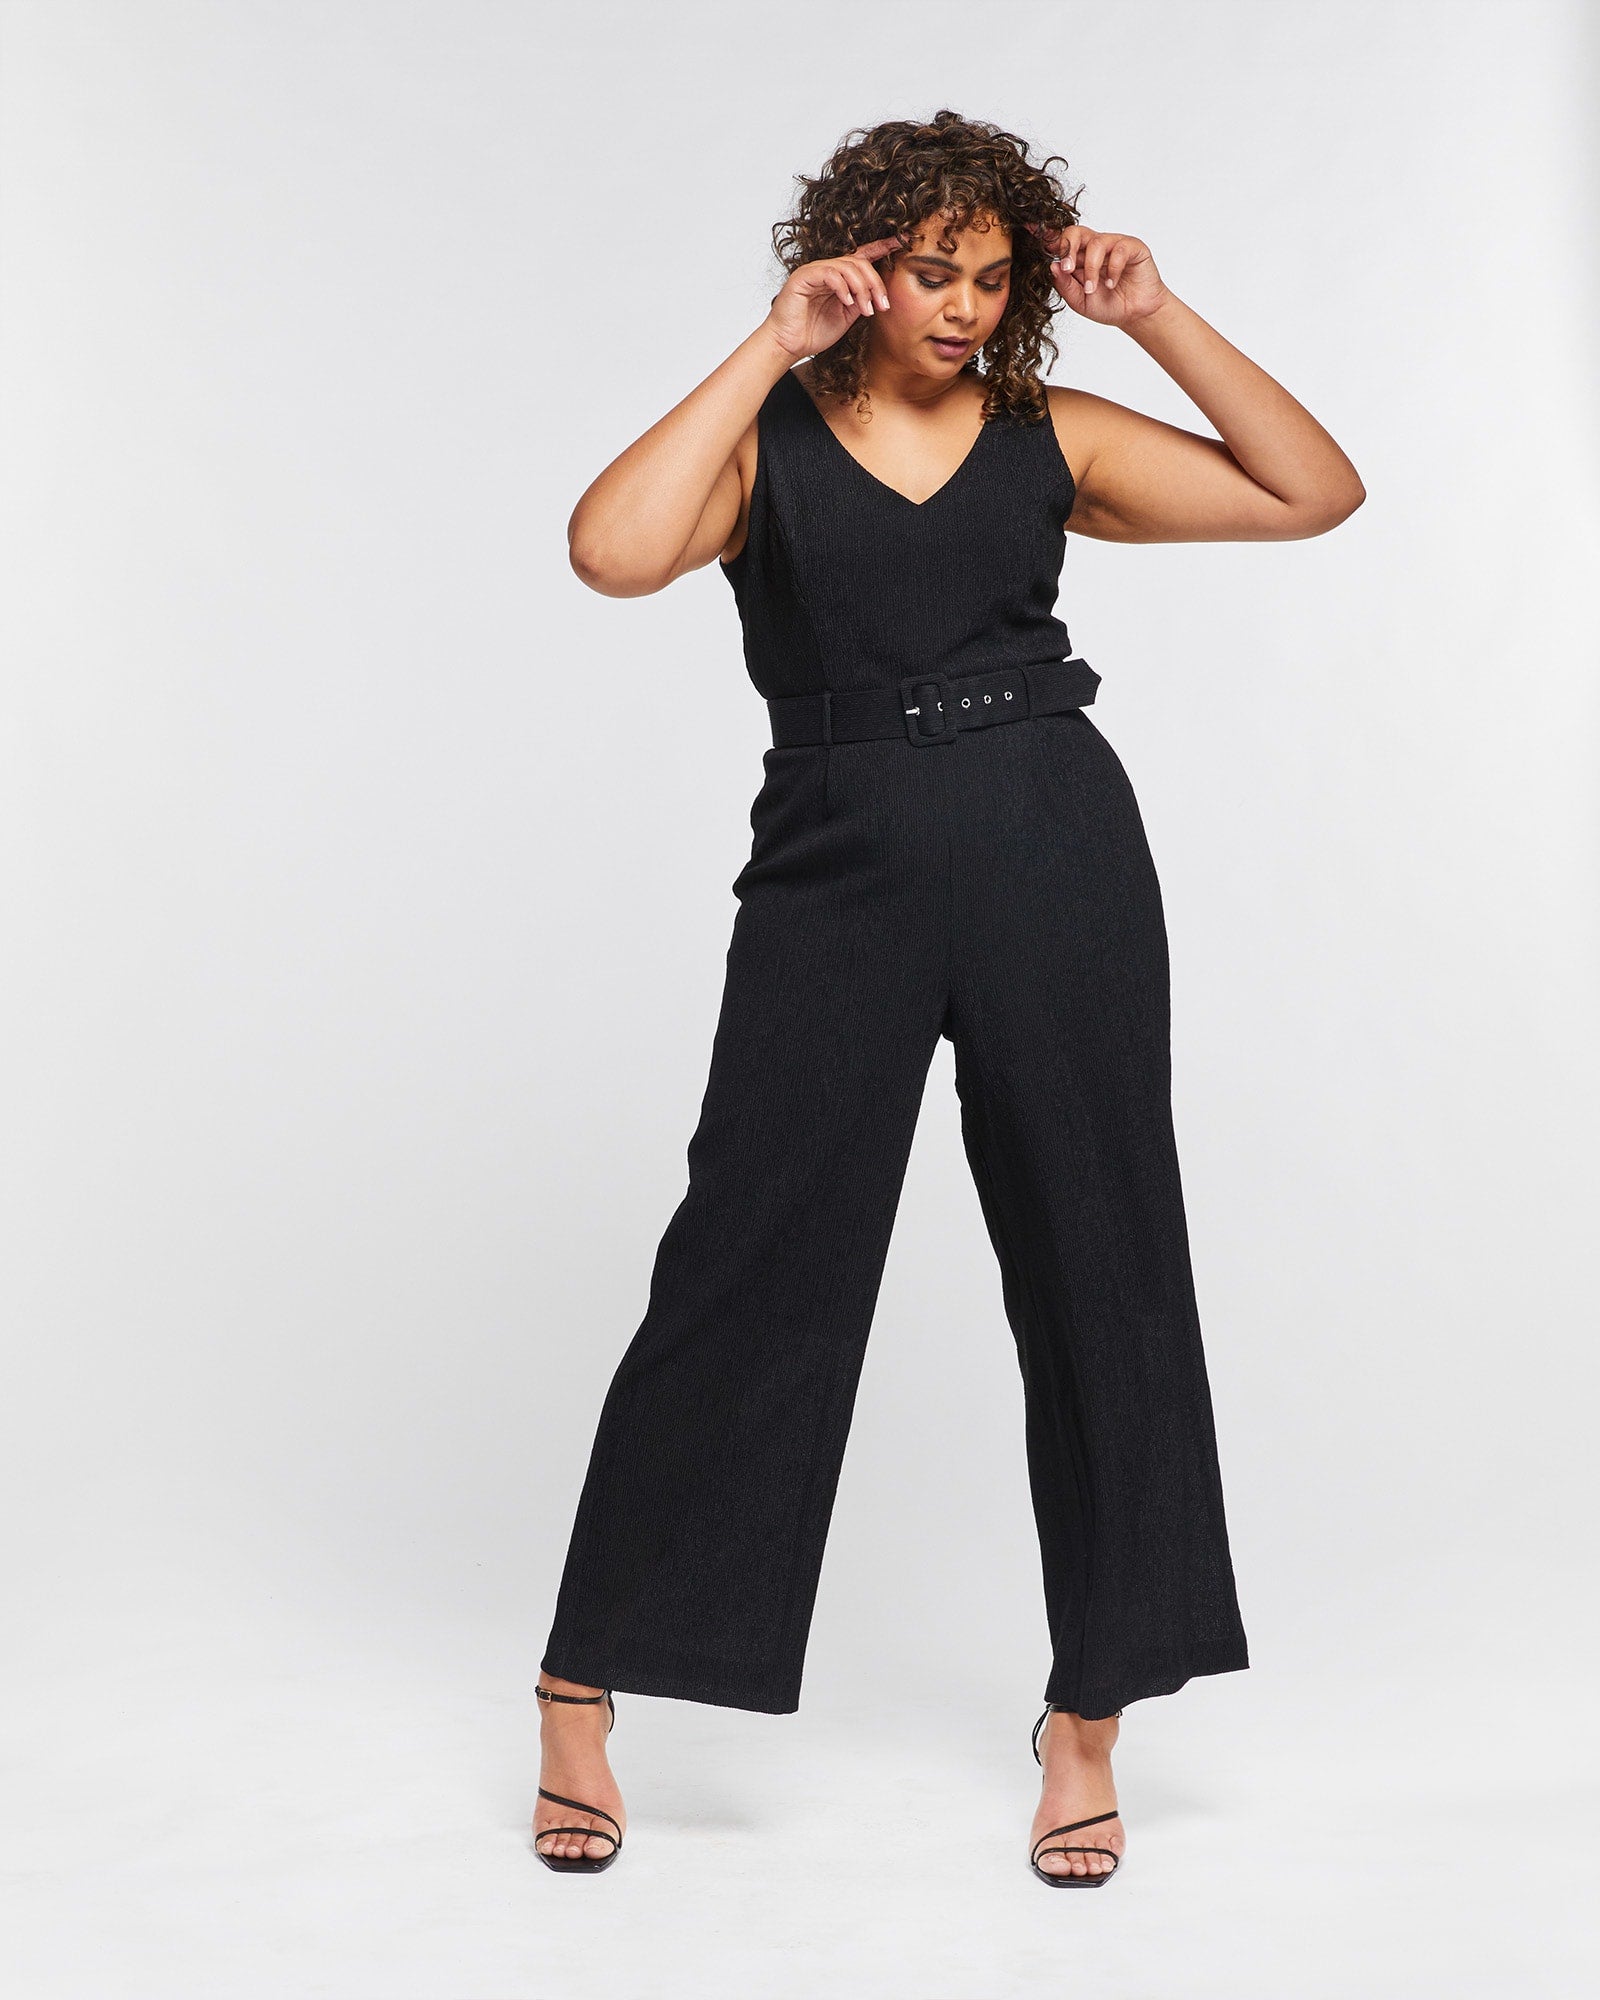 Plus Size Elegant Black Long Sleeve Jumpsuit Formal For Women Sexy  Bodysuits With Long Sleeves For Evening Wear From Dongporou, $20.64